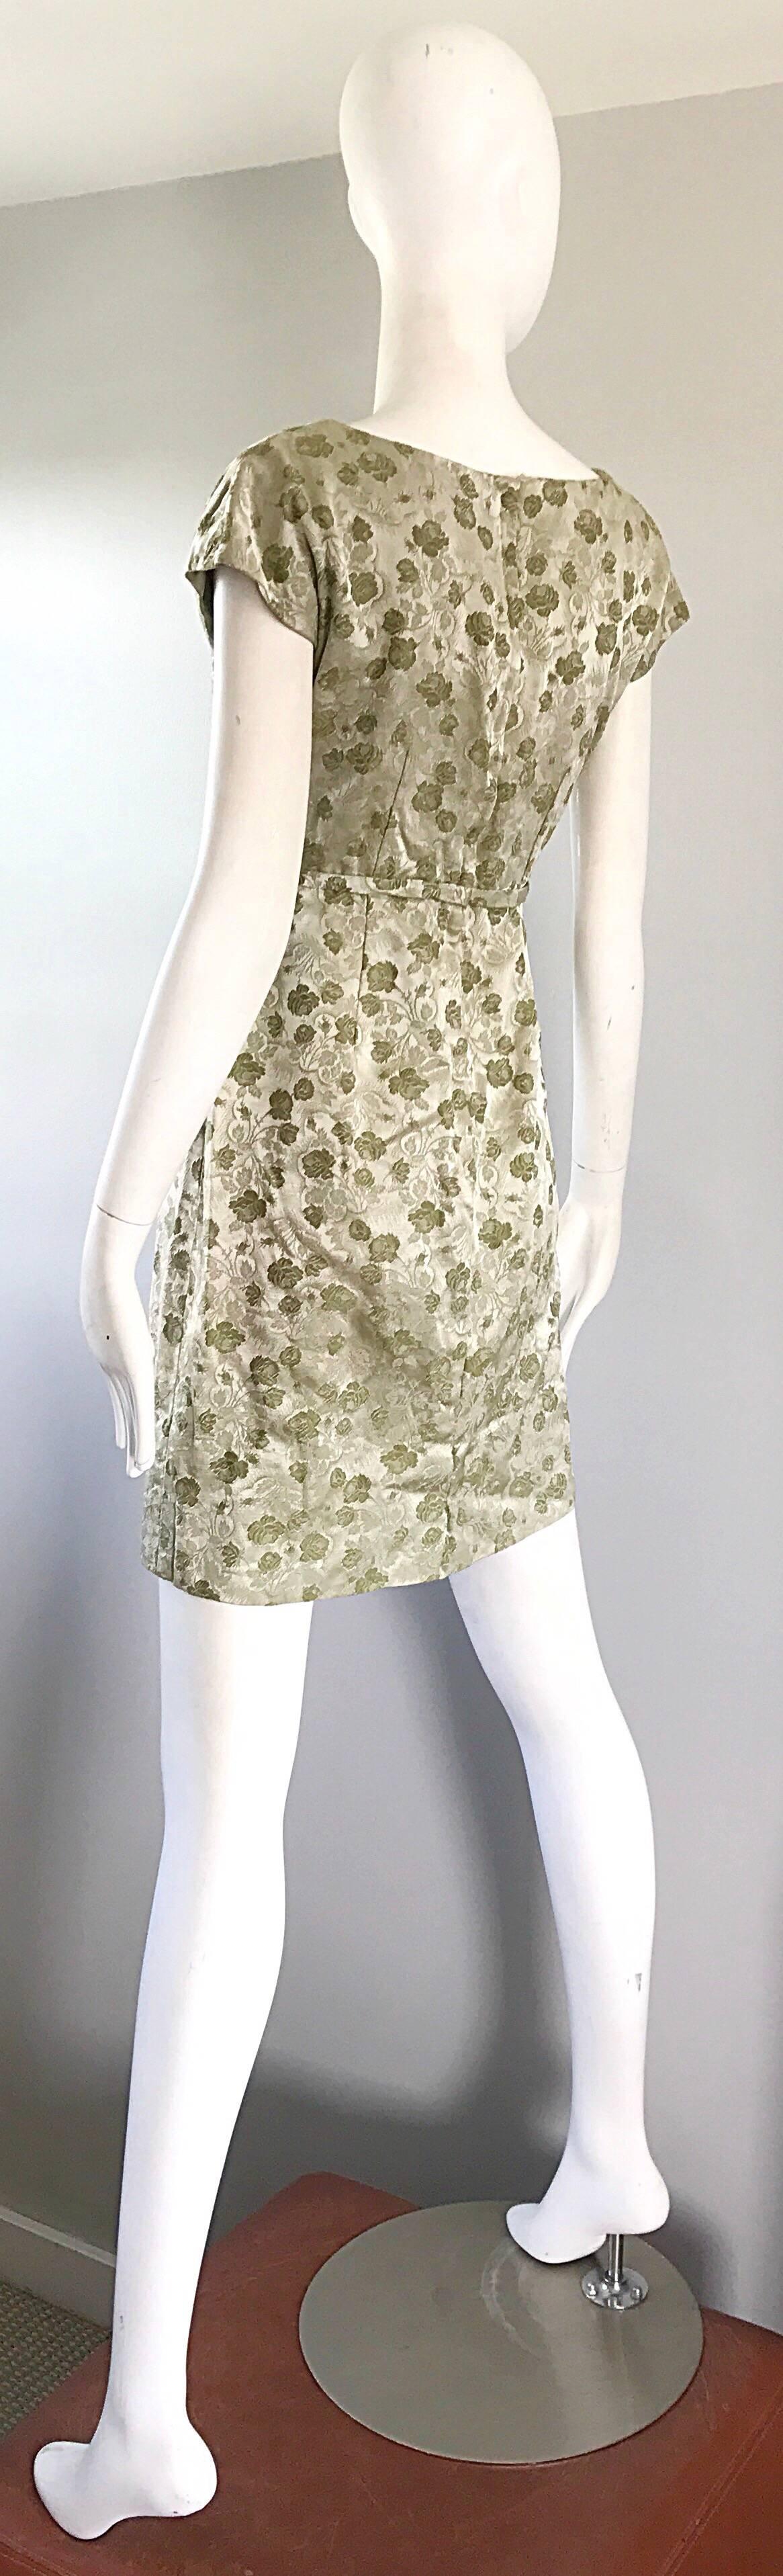 1950s Demi Couture Avocado Green Silk Brocade Vintage 50s Cap Sleeve Dress In Excellent Condition For Sale In San Diego, CA